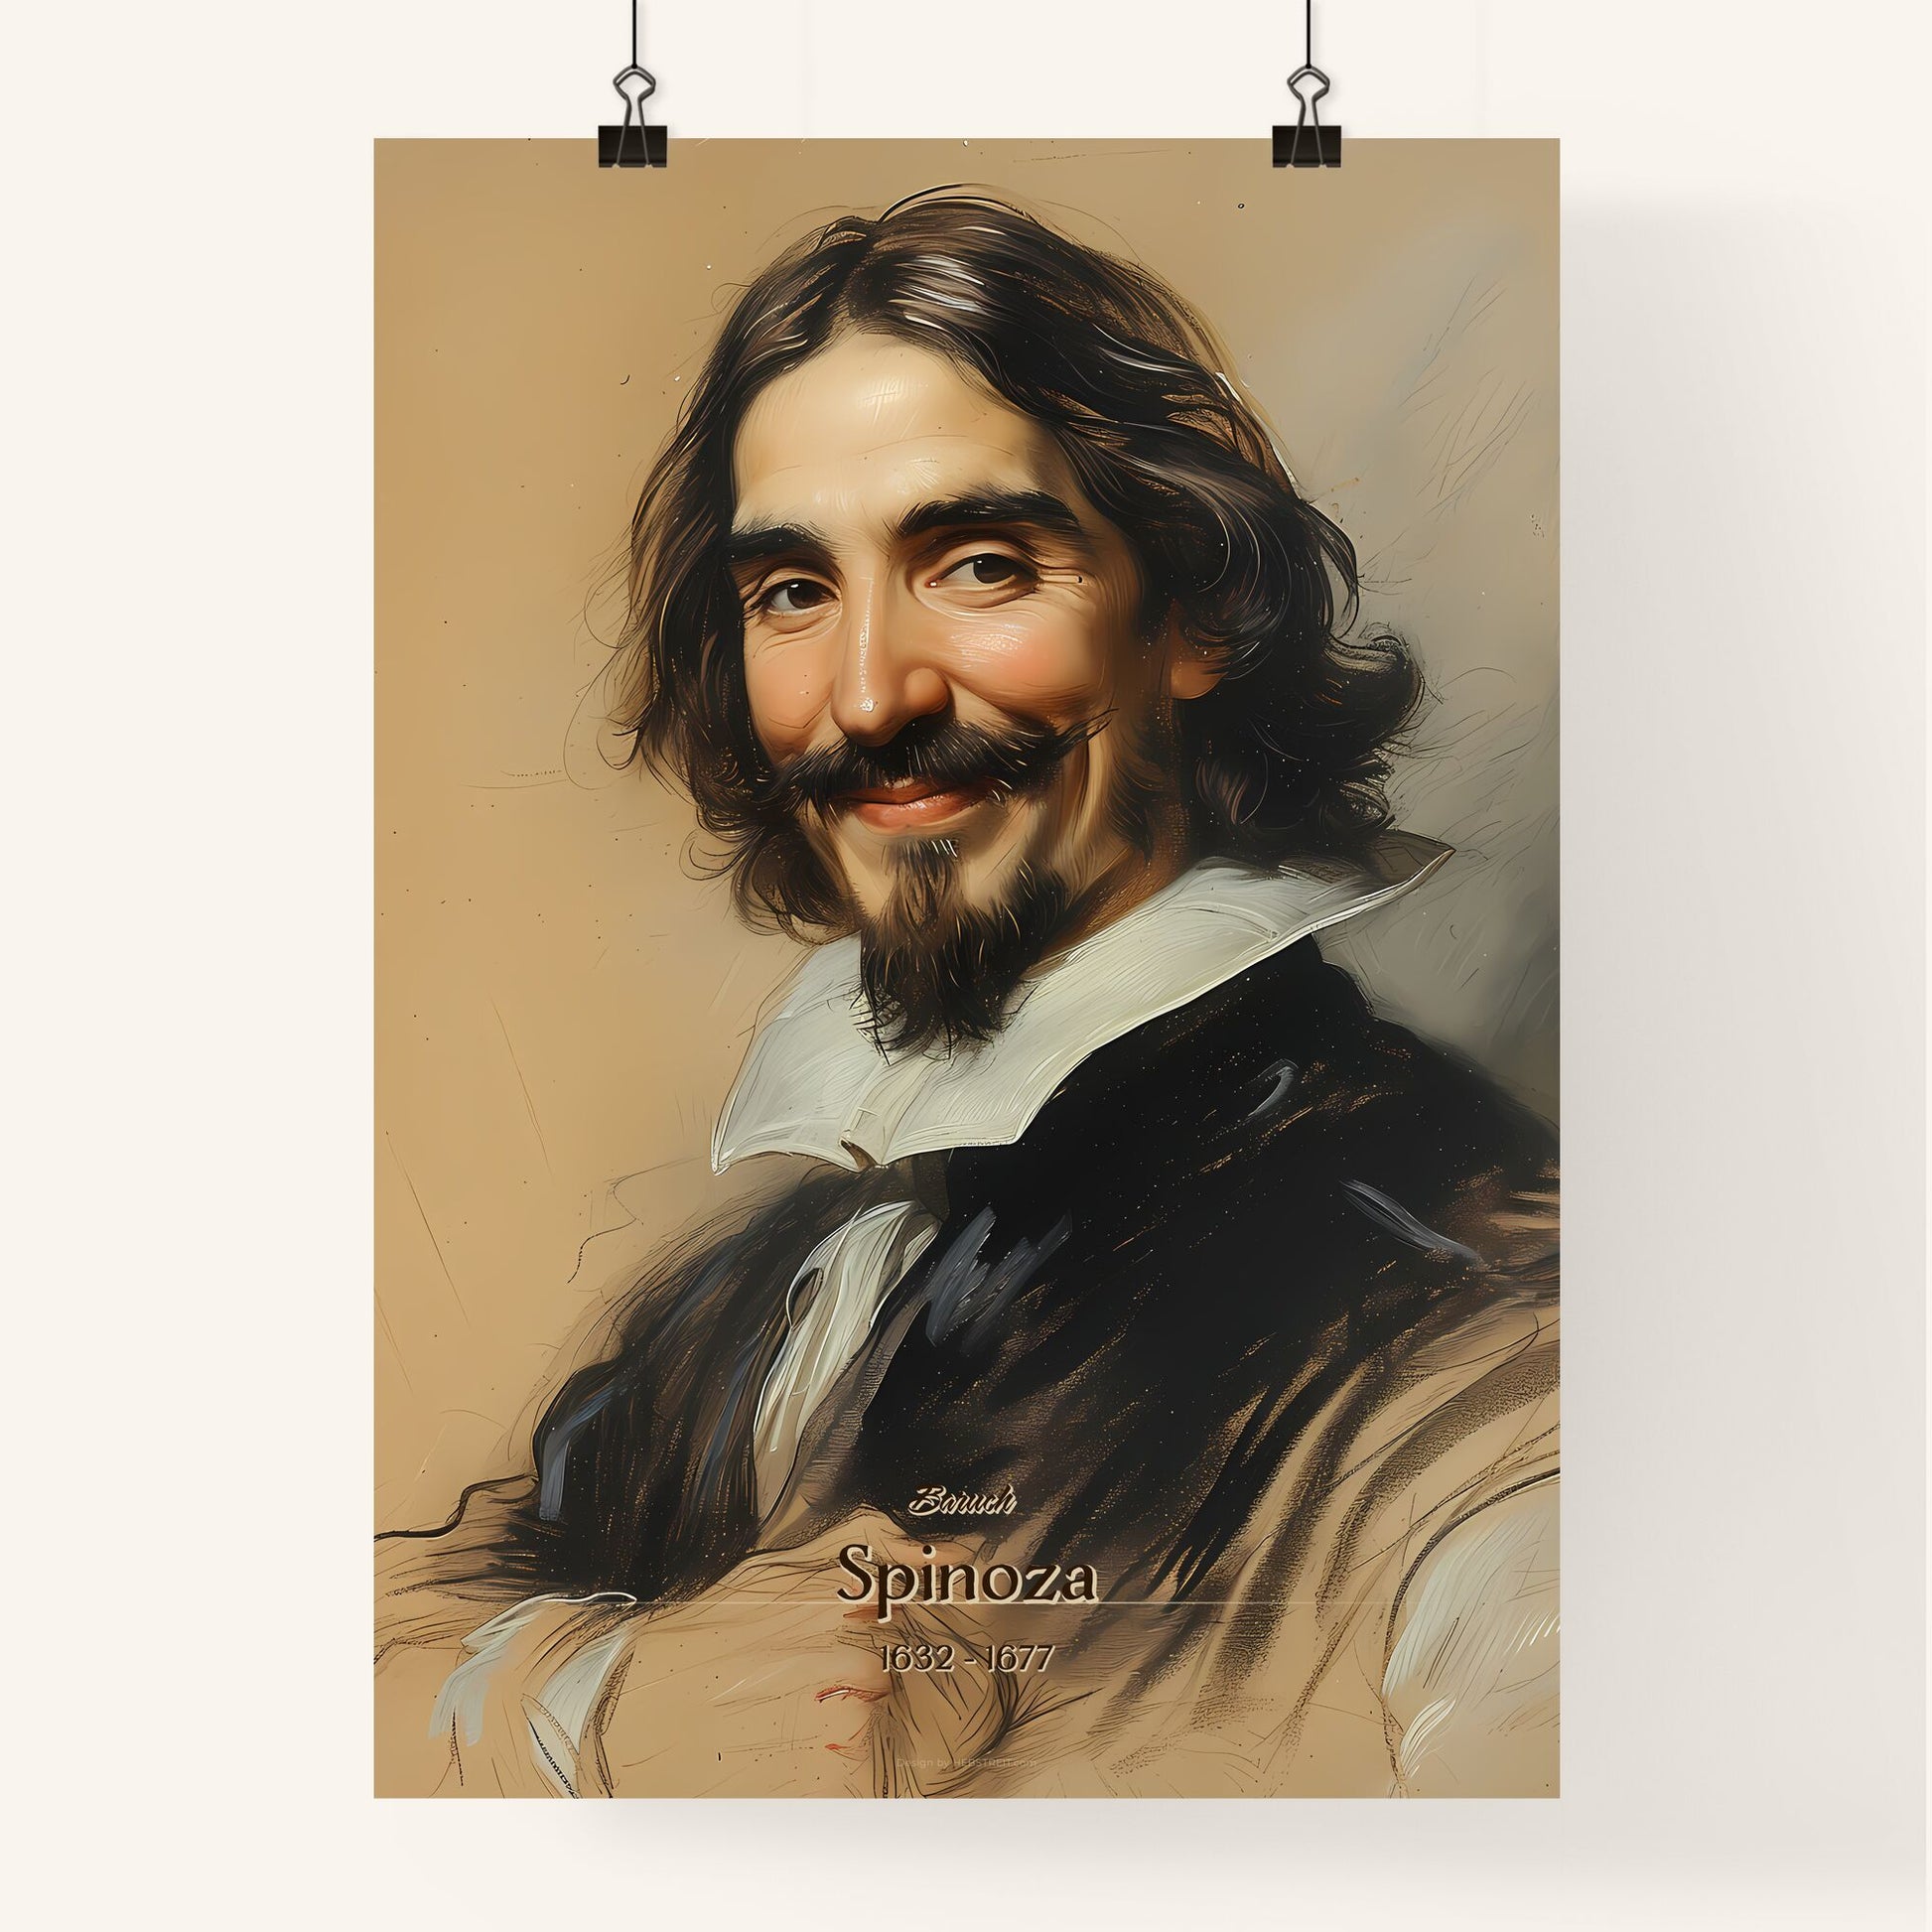 Baruch, Spinoza, 1632 - 1677, A Poster of a man with long hair and a mustache Default Title